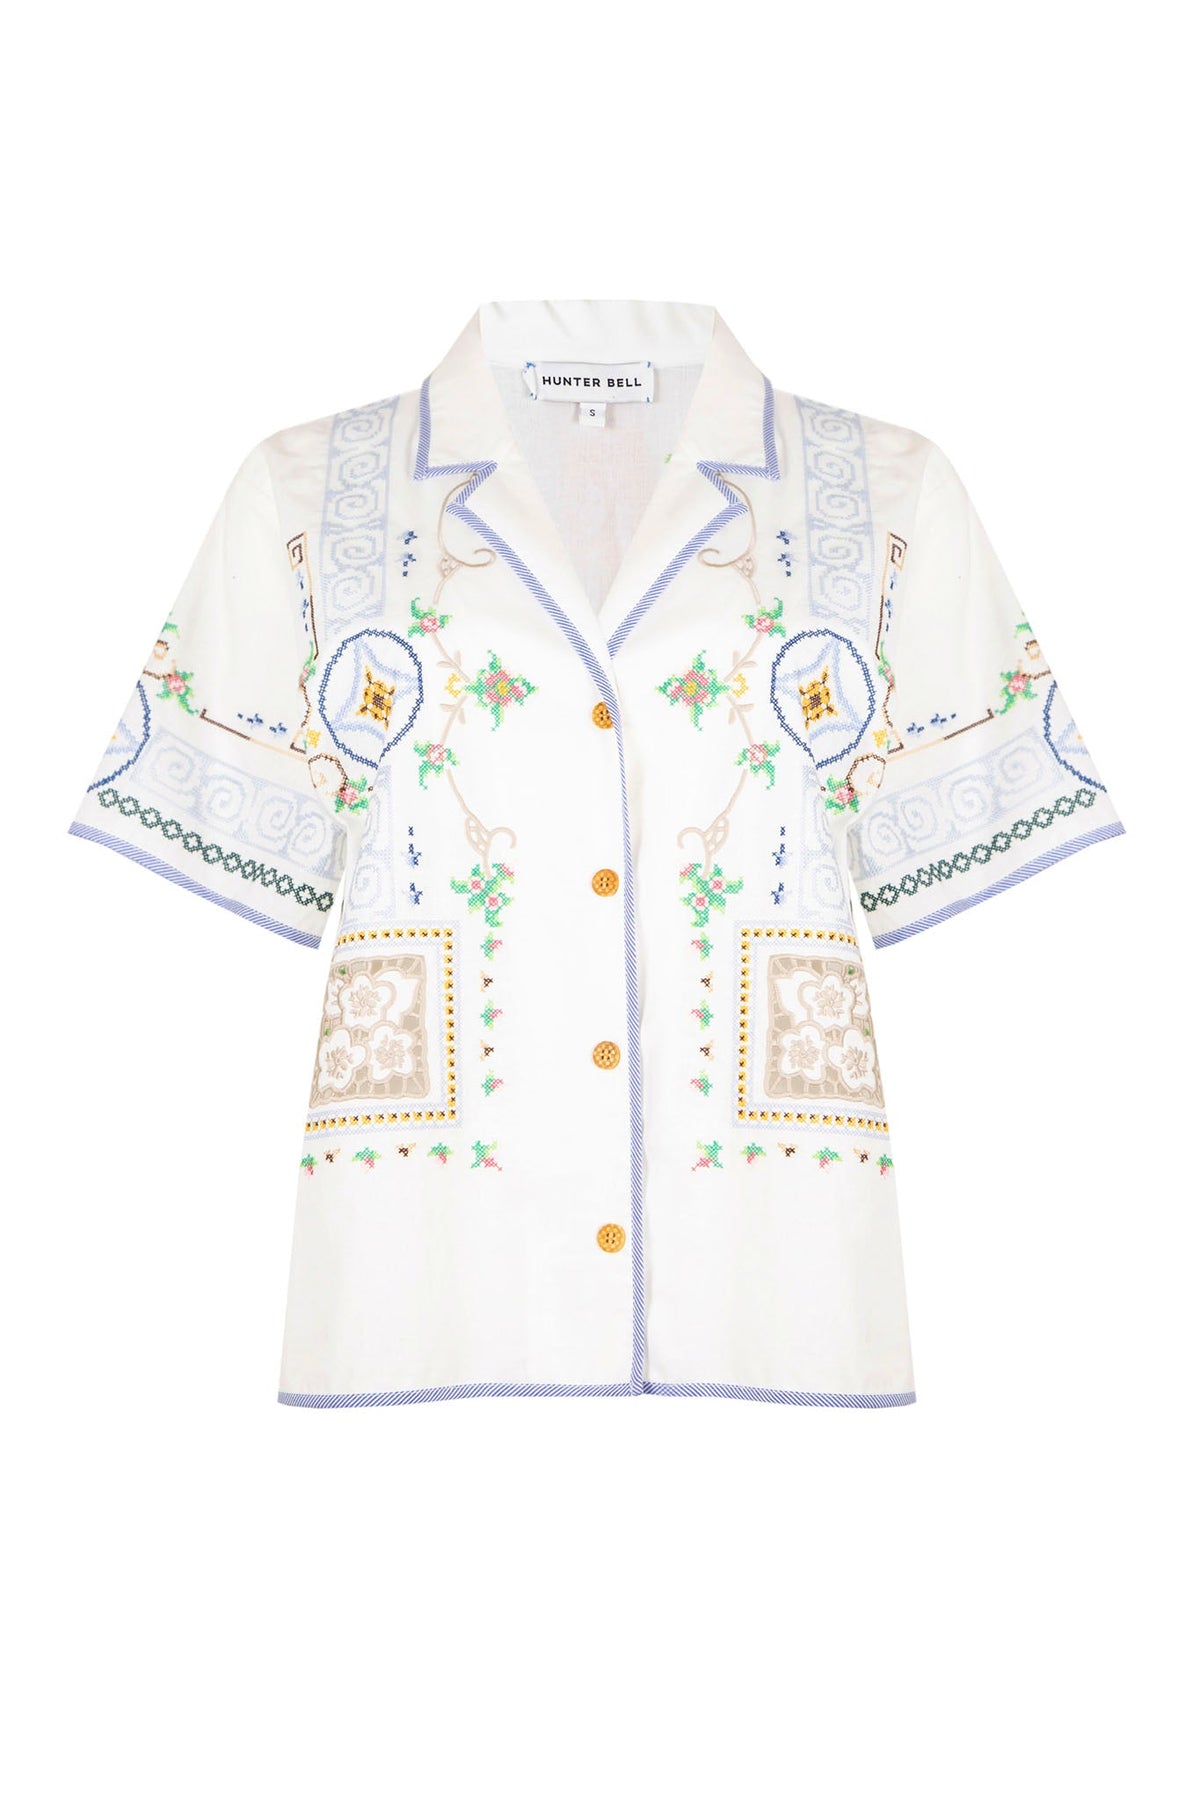 The Cora top has mosaic embroidery, eyelet cutouts, striped piping and wooden buttons.